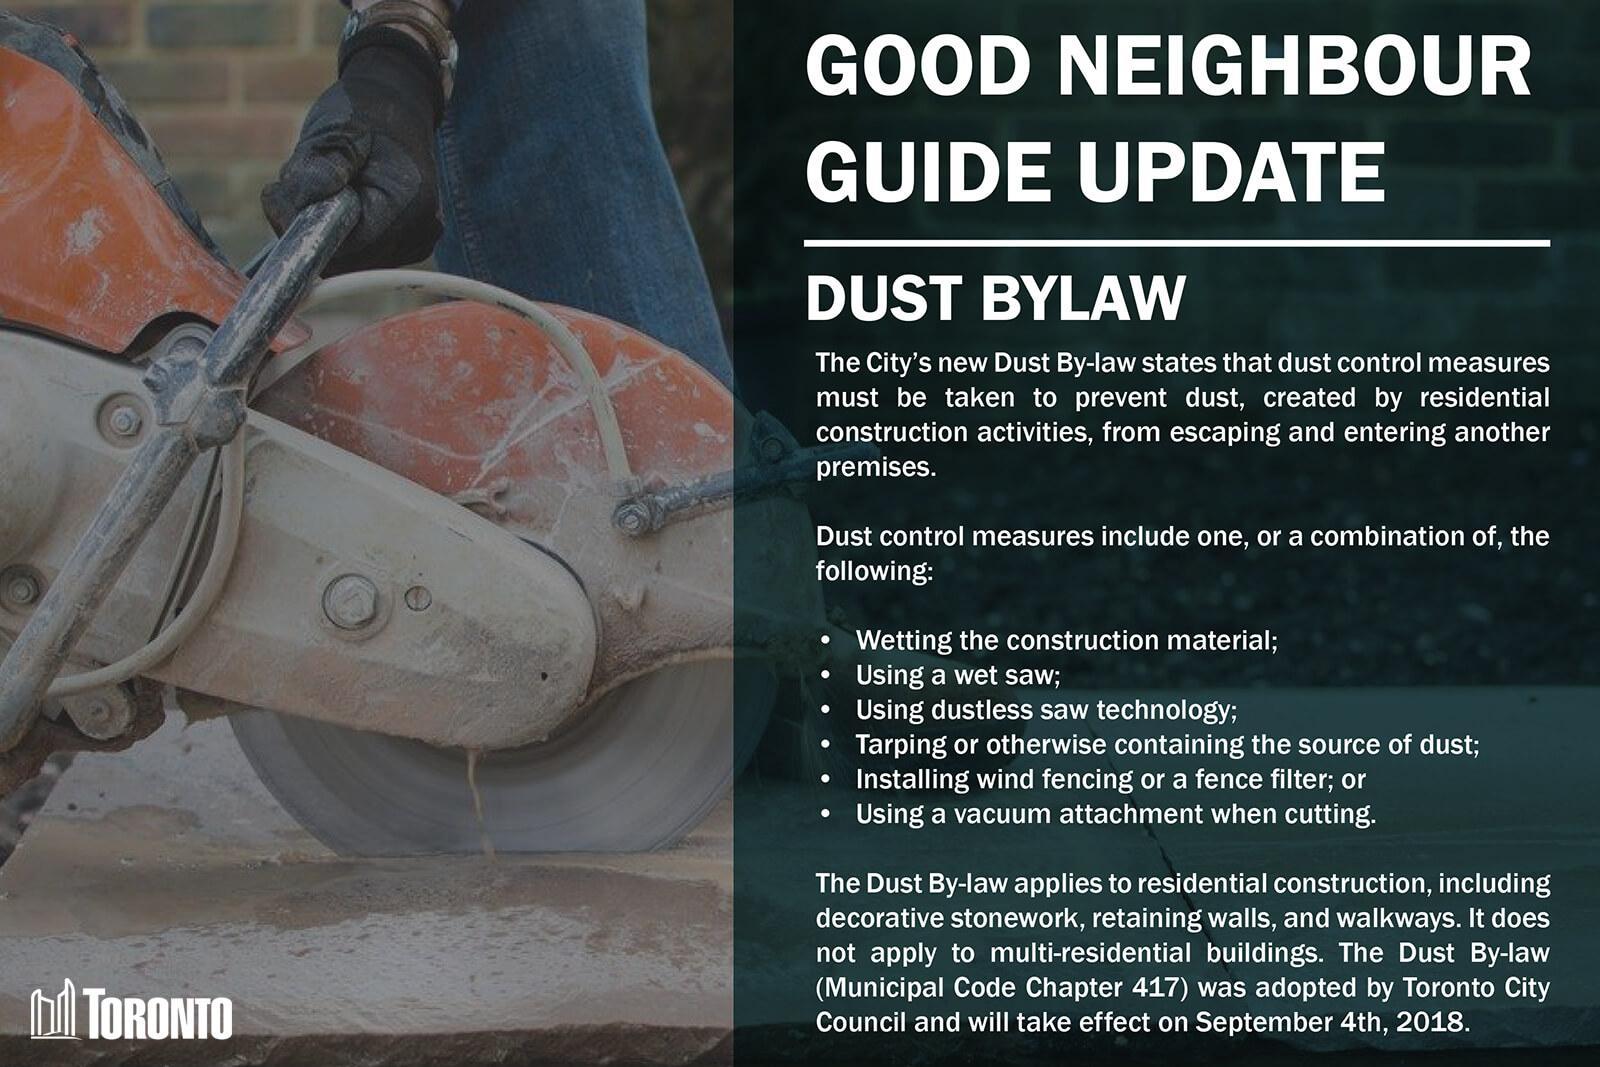 City of Toronto residential construction dust bylaw